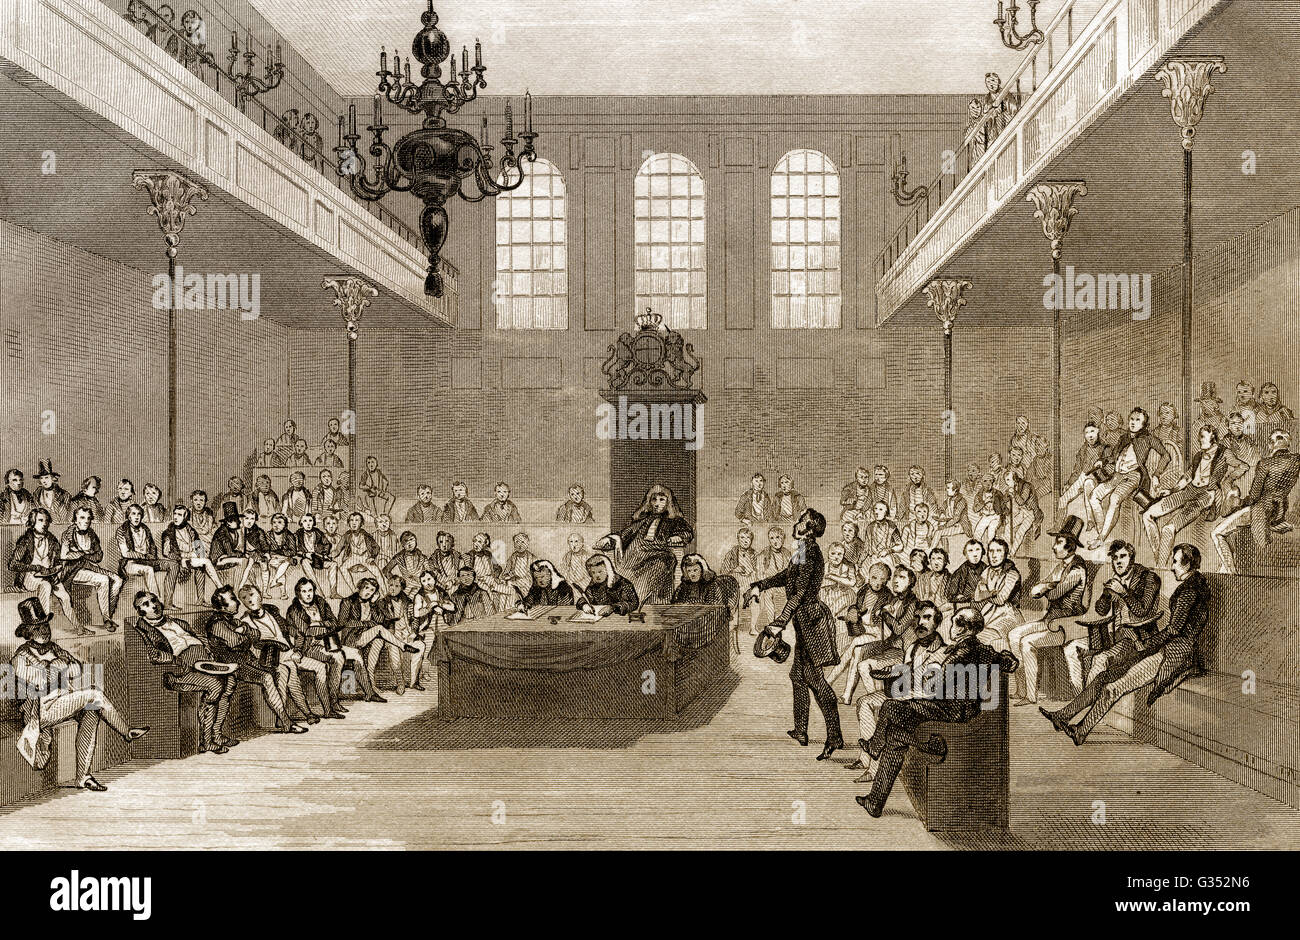 The House of Commons, London, England, 19th century Stock Photo